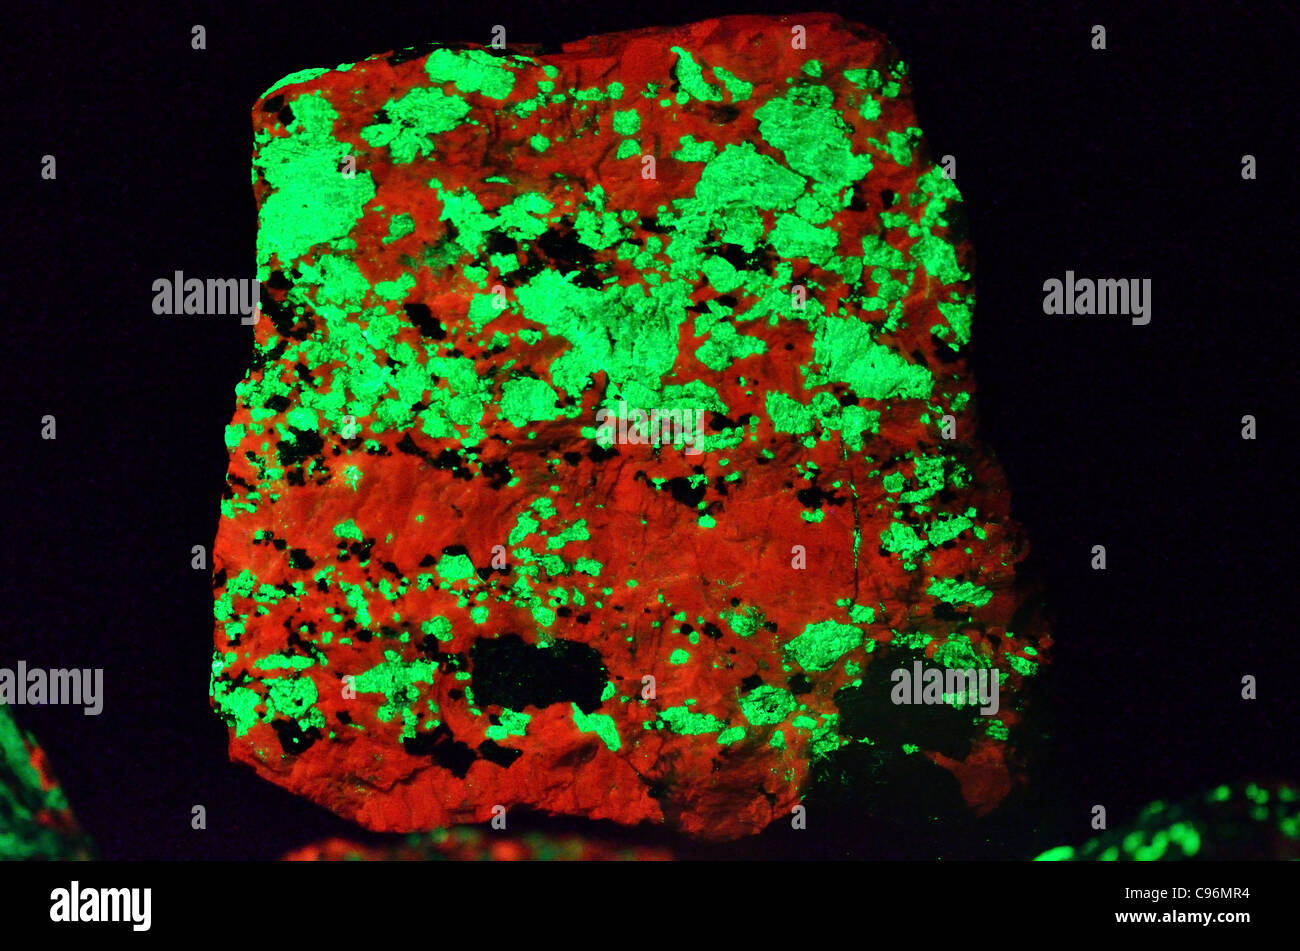 Fluorescent minerals willemite  (zinc silicate Zn2SiO4) glowing green under UV light. Calcite in red color. Stock Photo